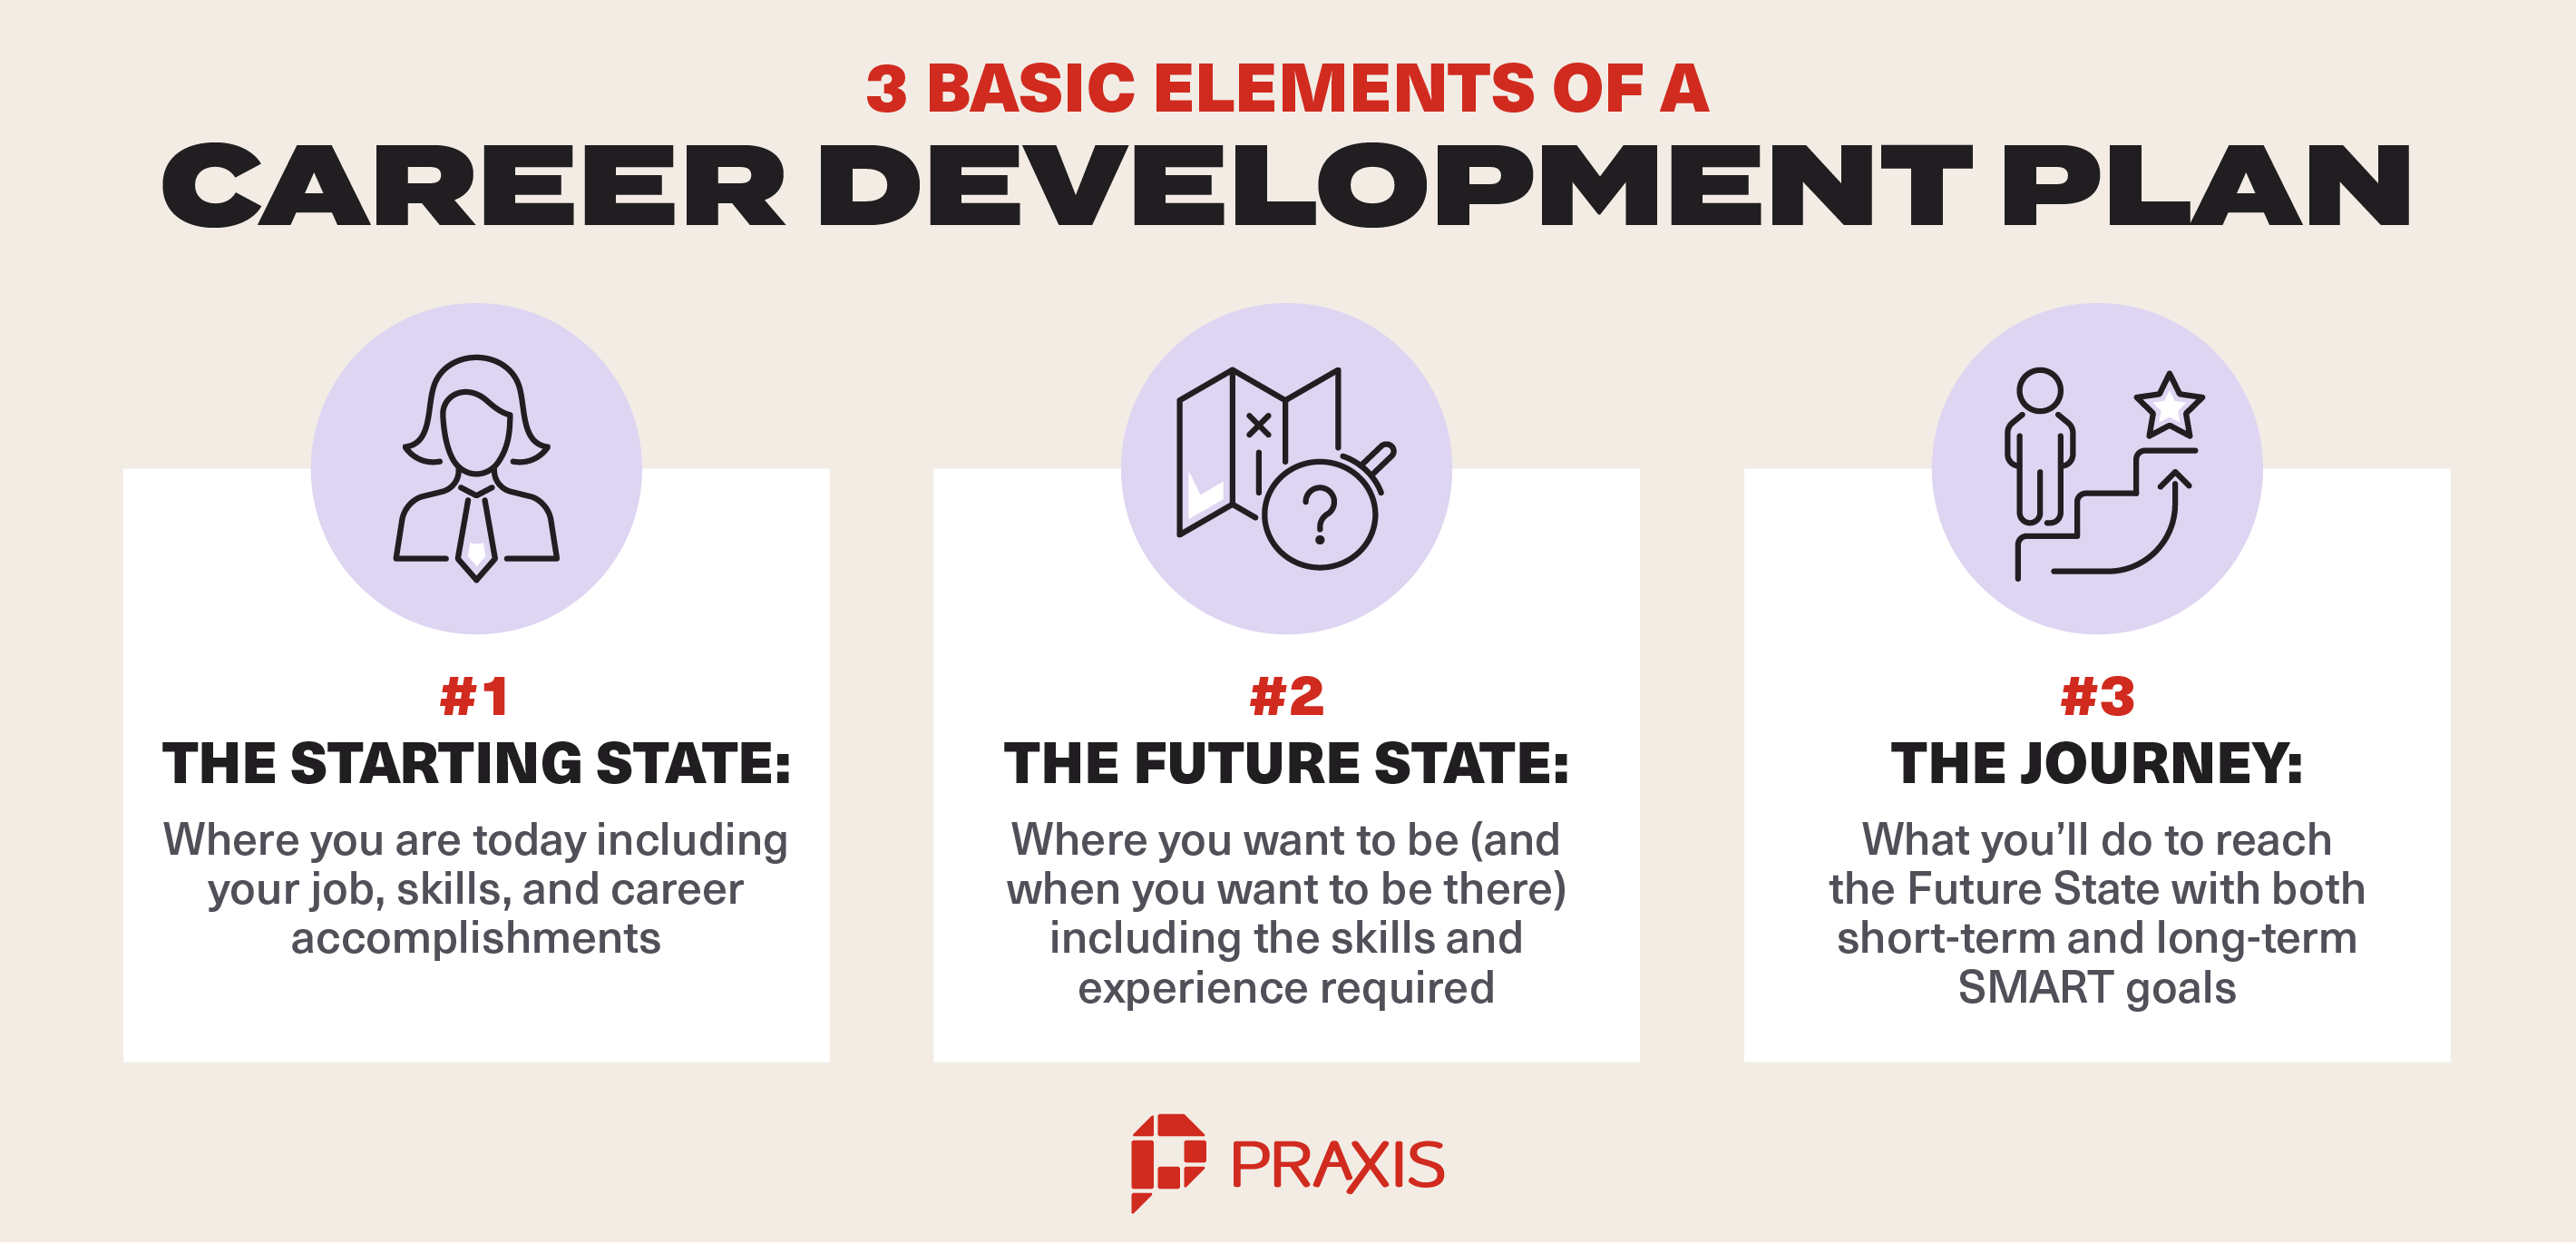 What Is a Career Development Plan